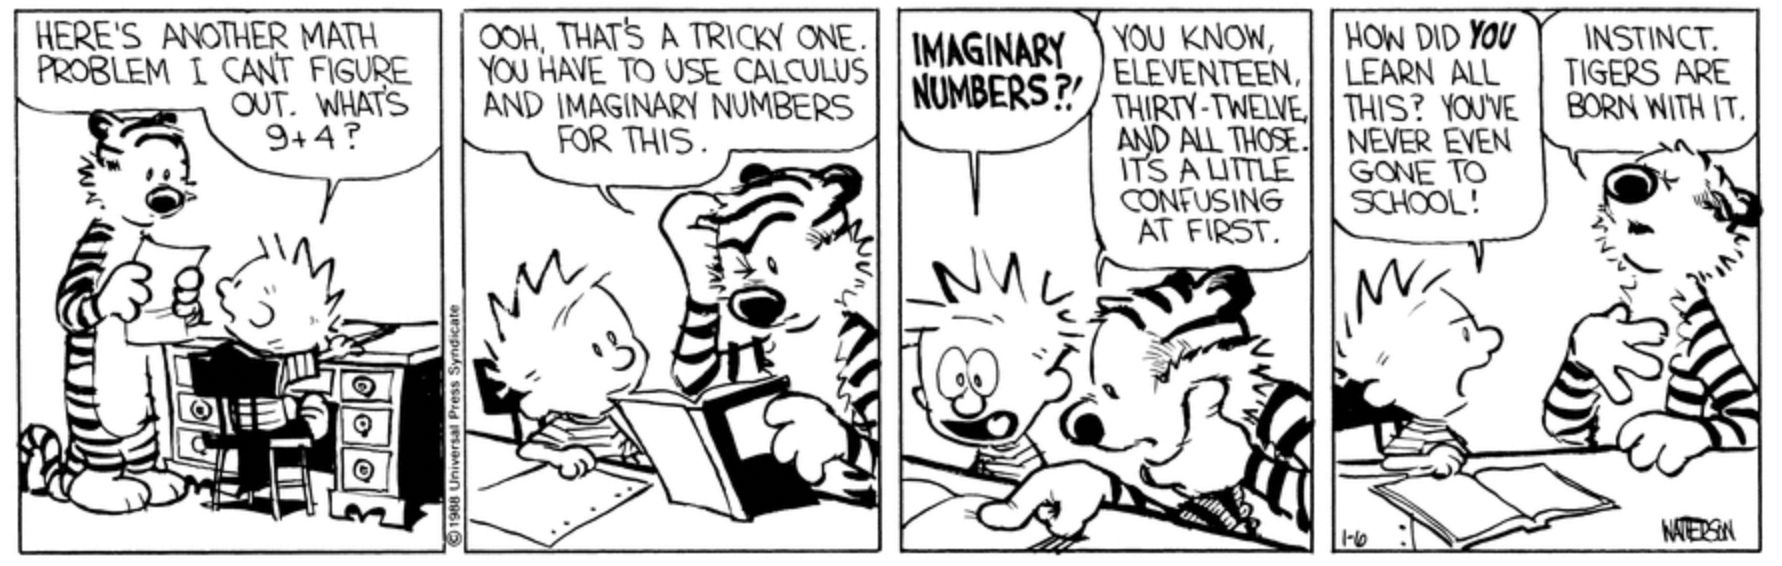 Imaginary Numbers in Calvin and Hobbes